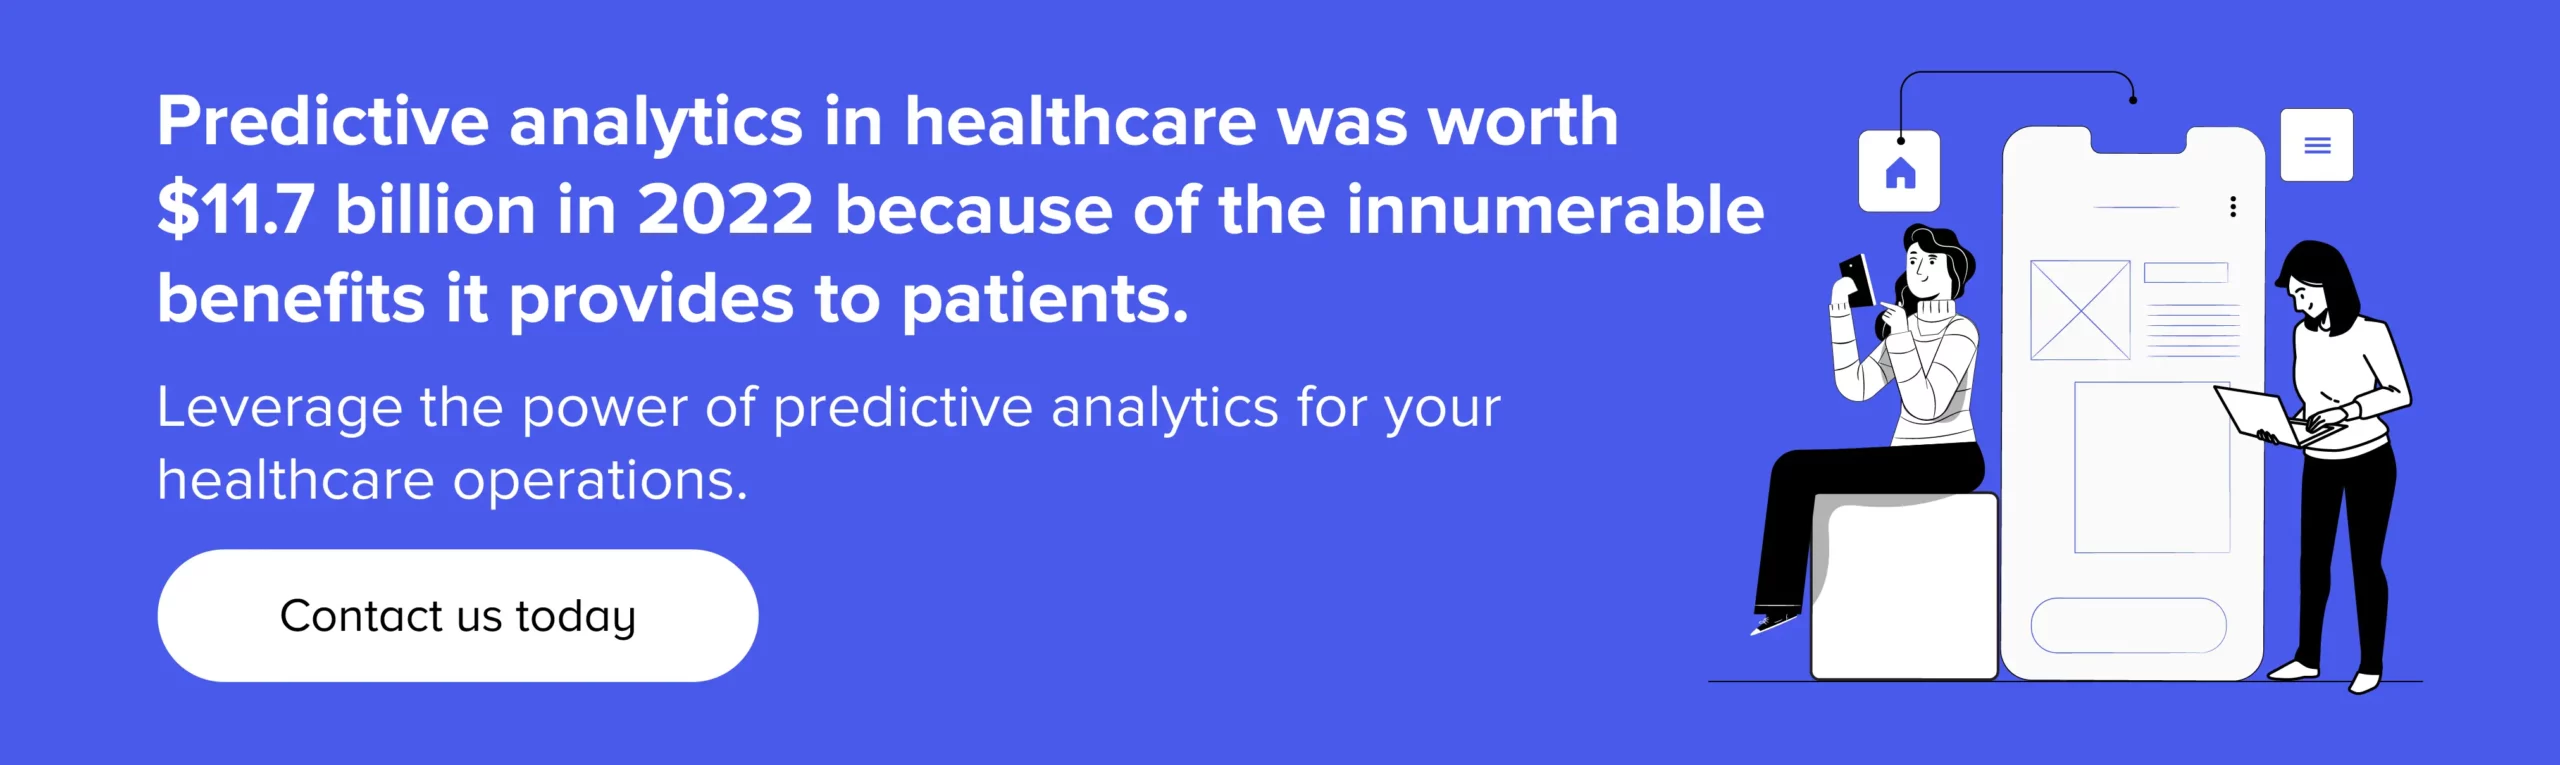 Leverage the power of predictive analytics for your healthcare operations